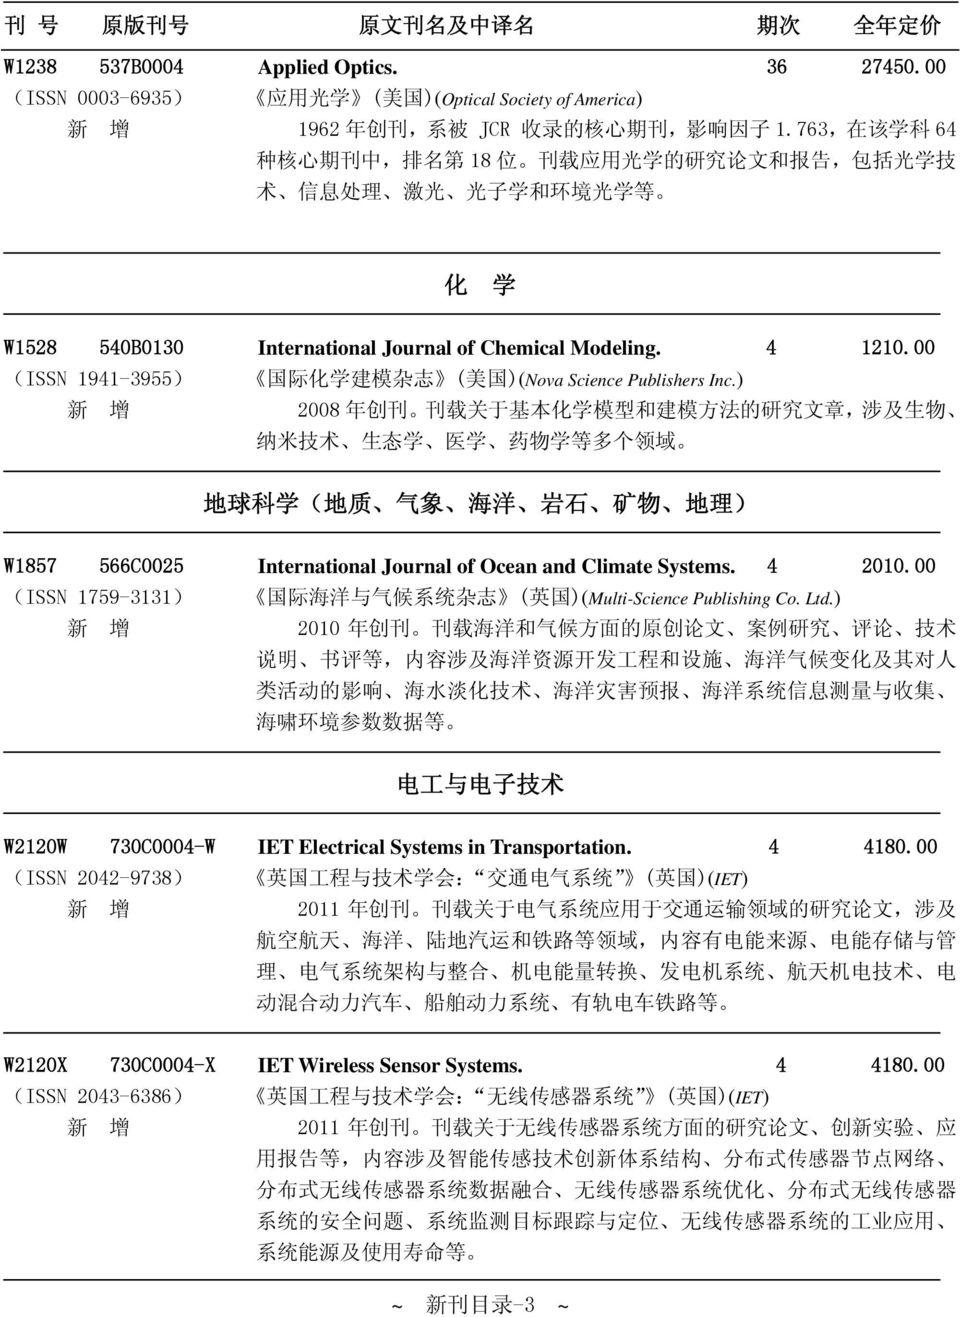 00 (ISSN 1941-3955) 国 际 化 学 建 模 杂 志 ( 美 国 )(Nova Science Publishers Inc.